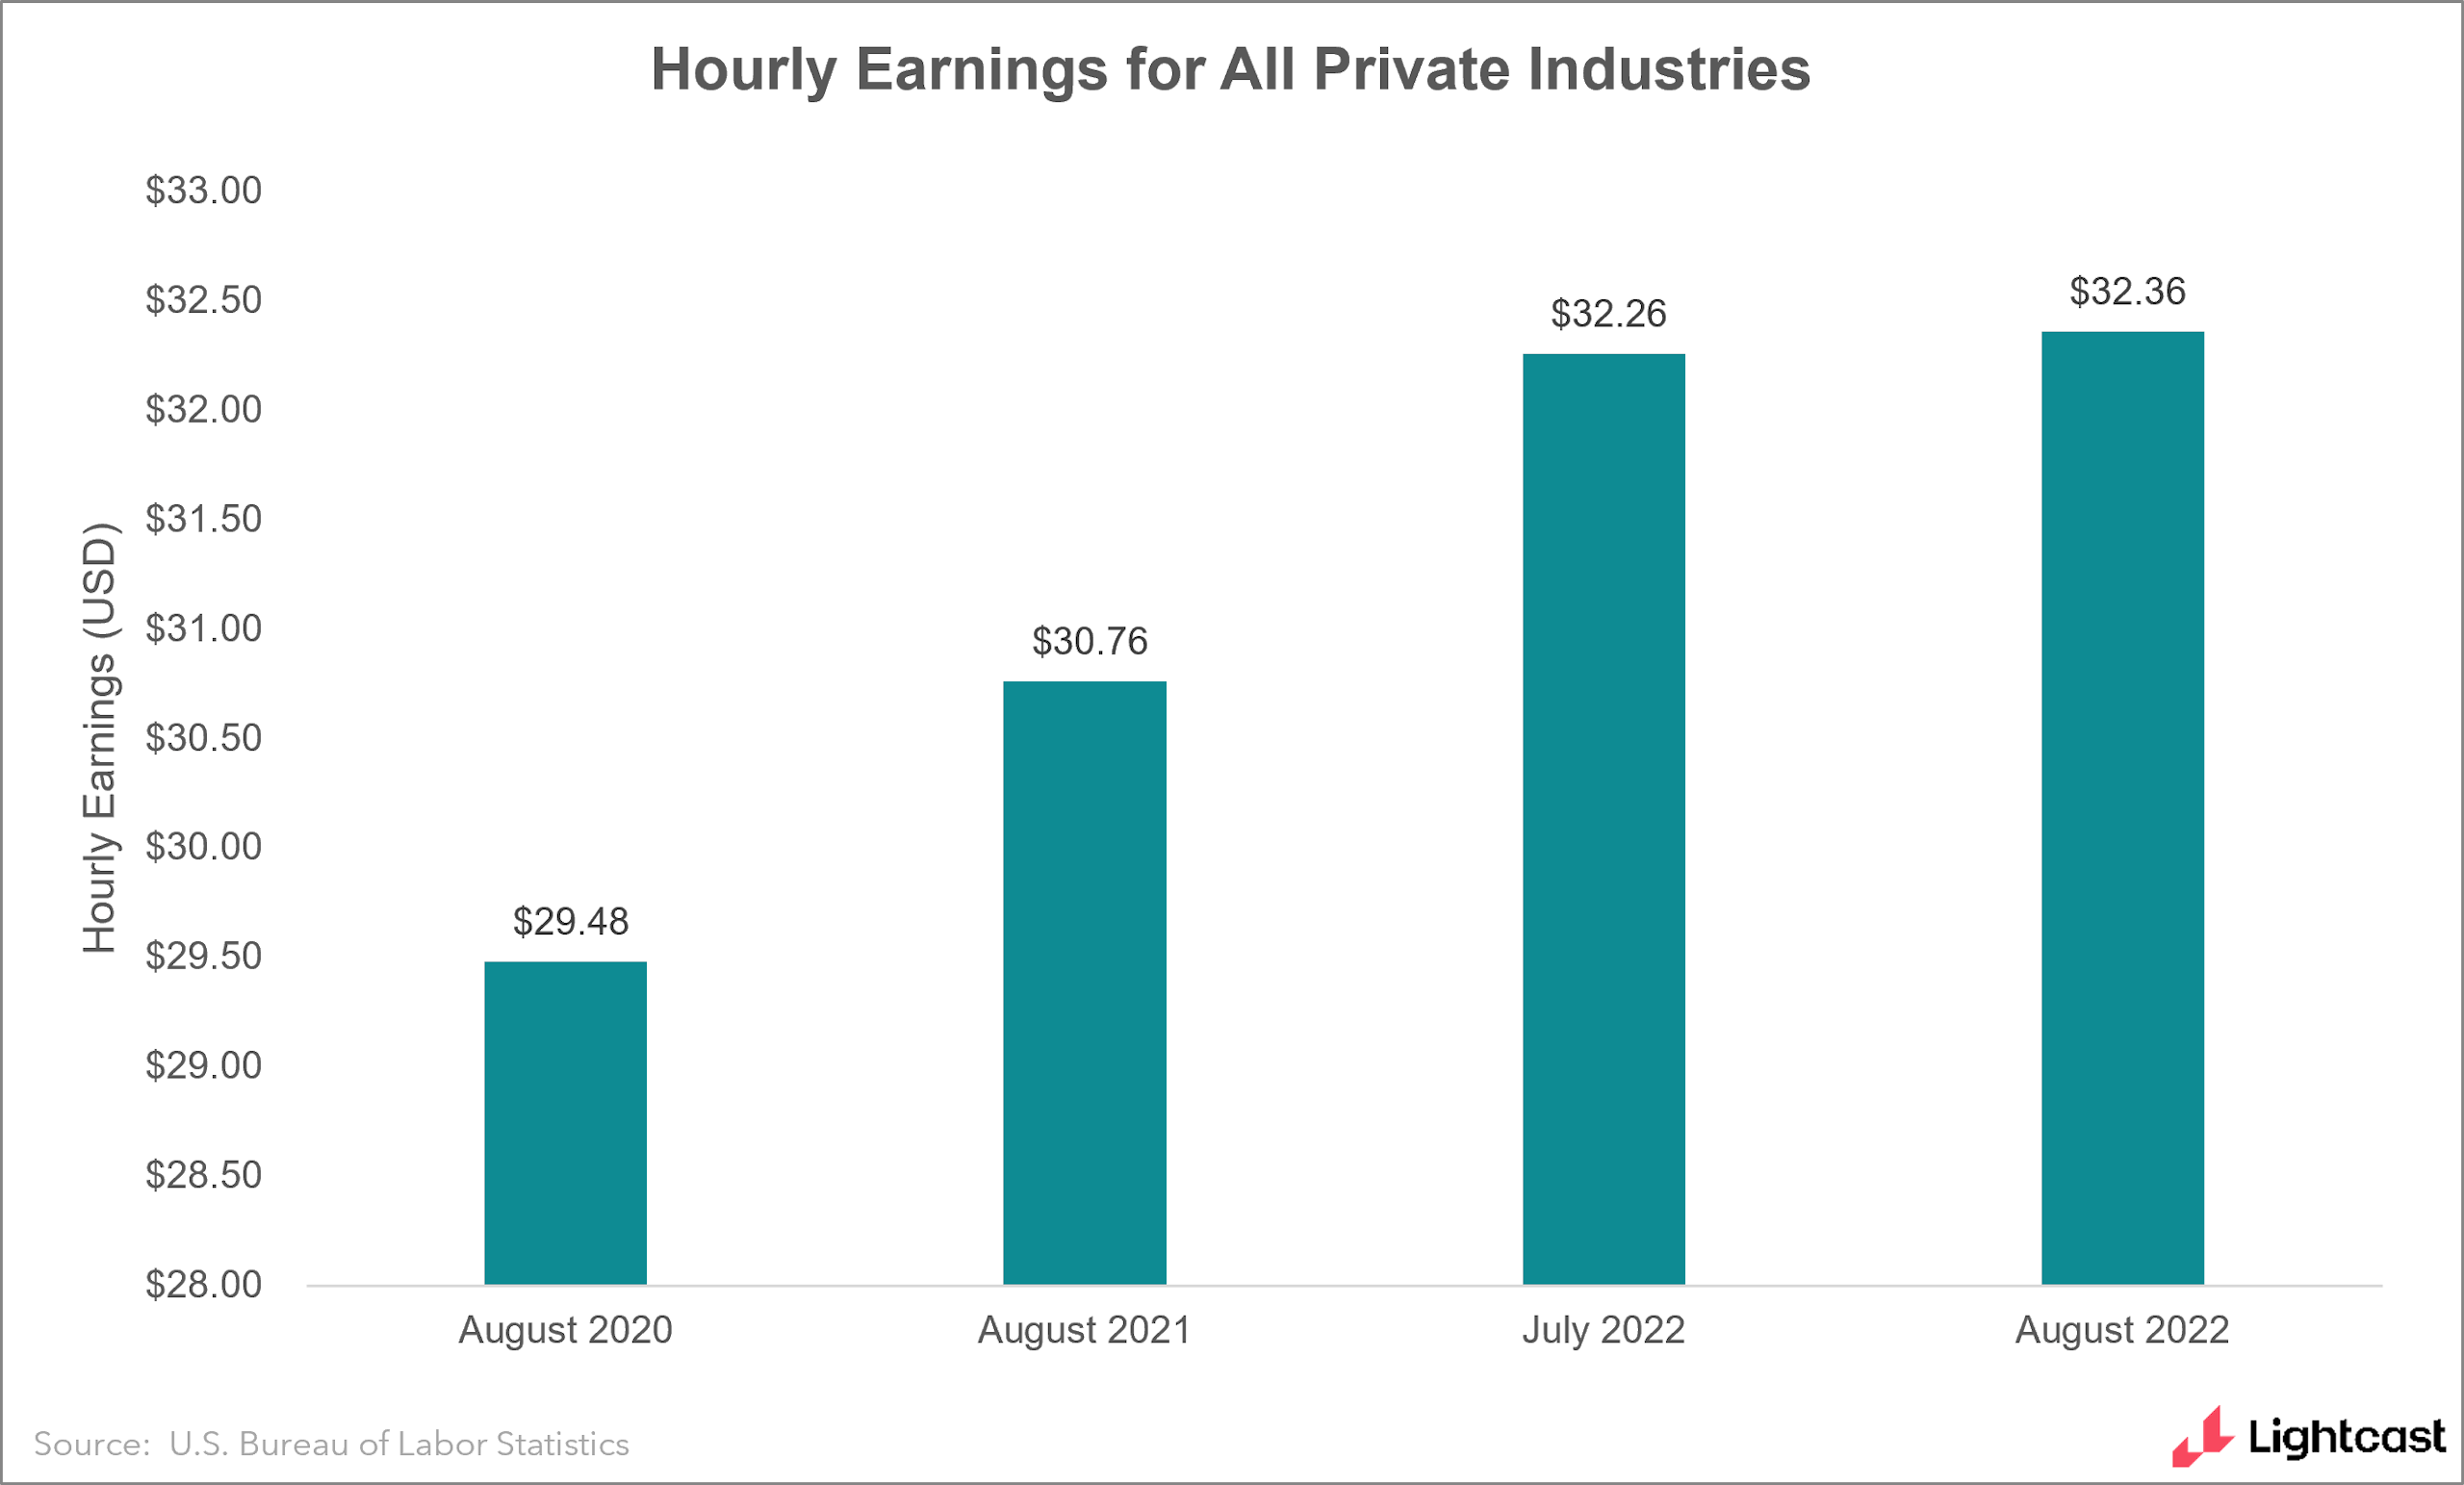 Bar chart showing hourly earnings among all private industries, showing steady increase up to $32.36 in August